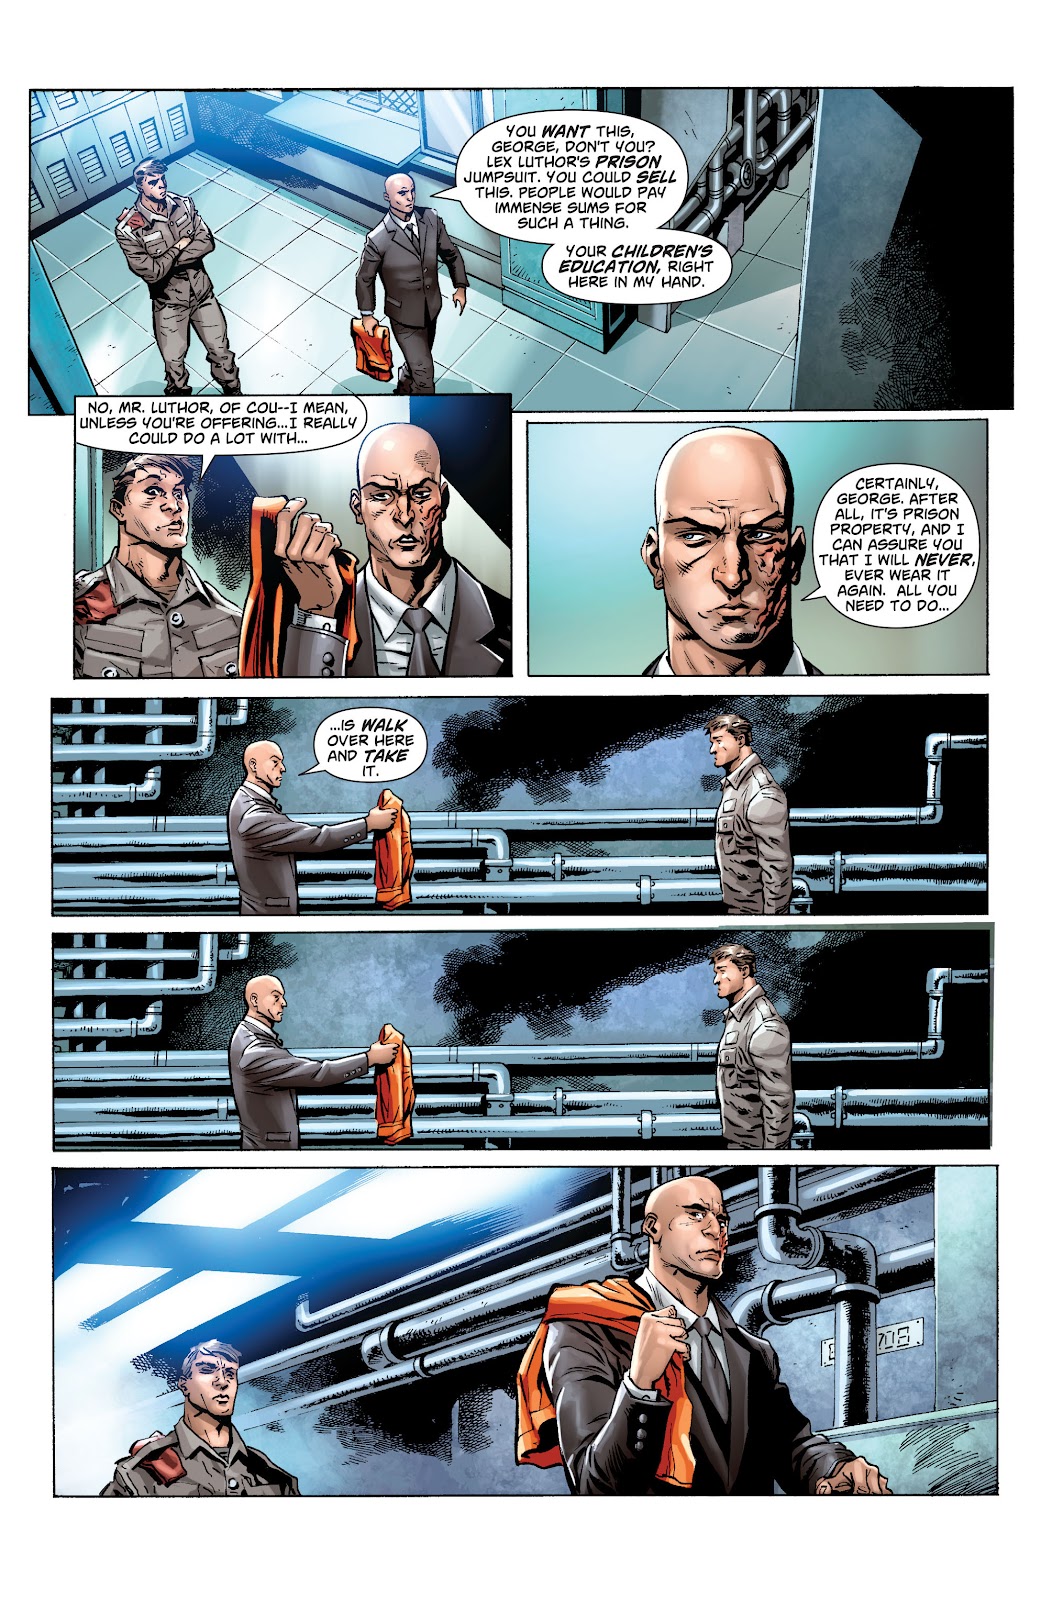 Action Comics (2011) issue 23.3 - Page 3